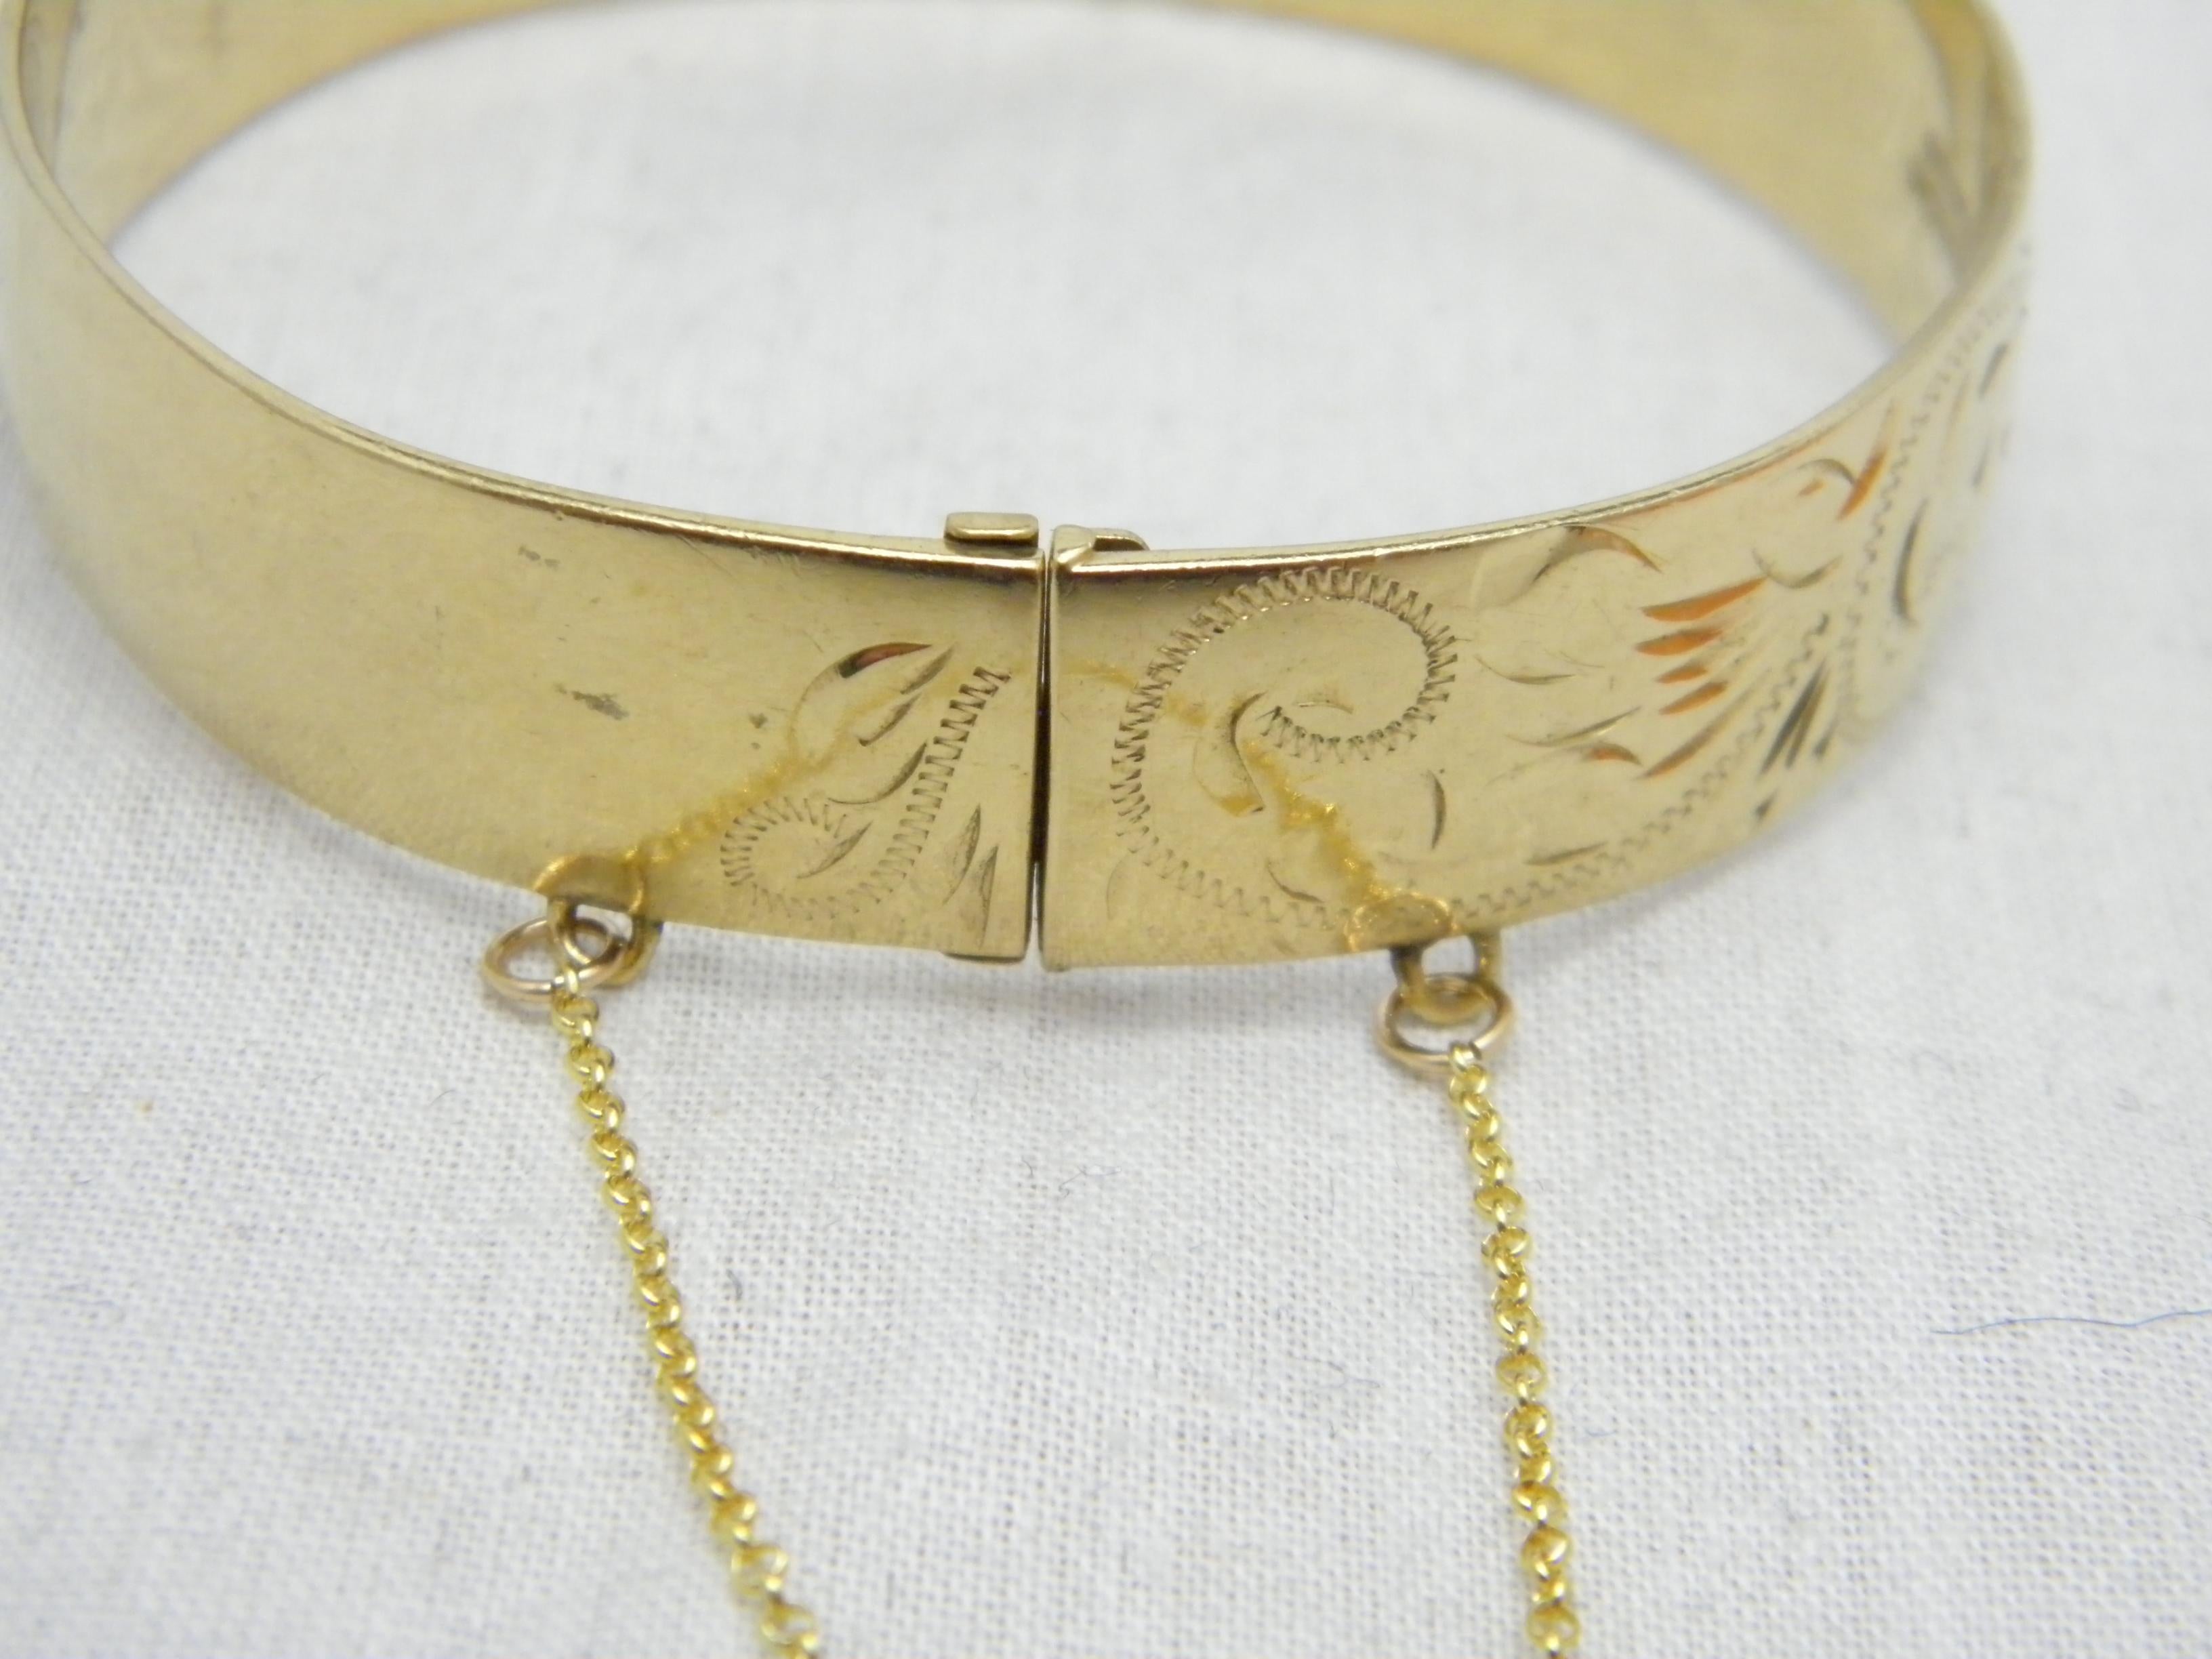 Bargain Vintage 9ct Gold 'Rolled' Floral Cuff Hinged Bracelet Bangle 375 Purity  In Good Condition For Sale In Camelford, GB